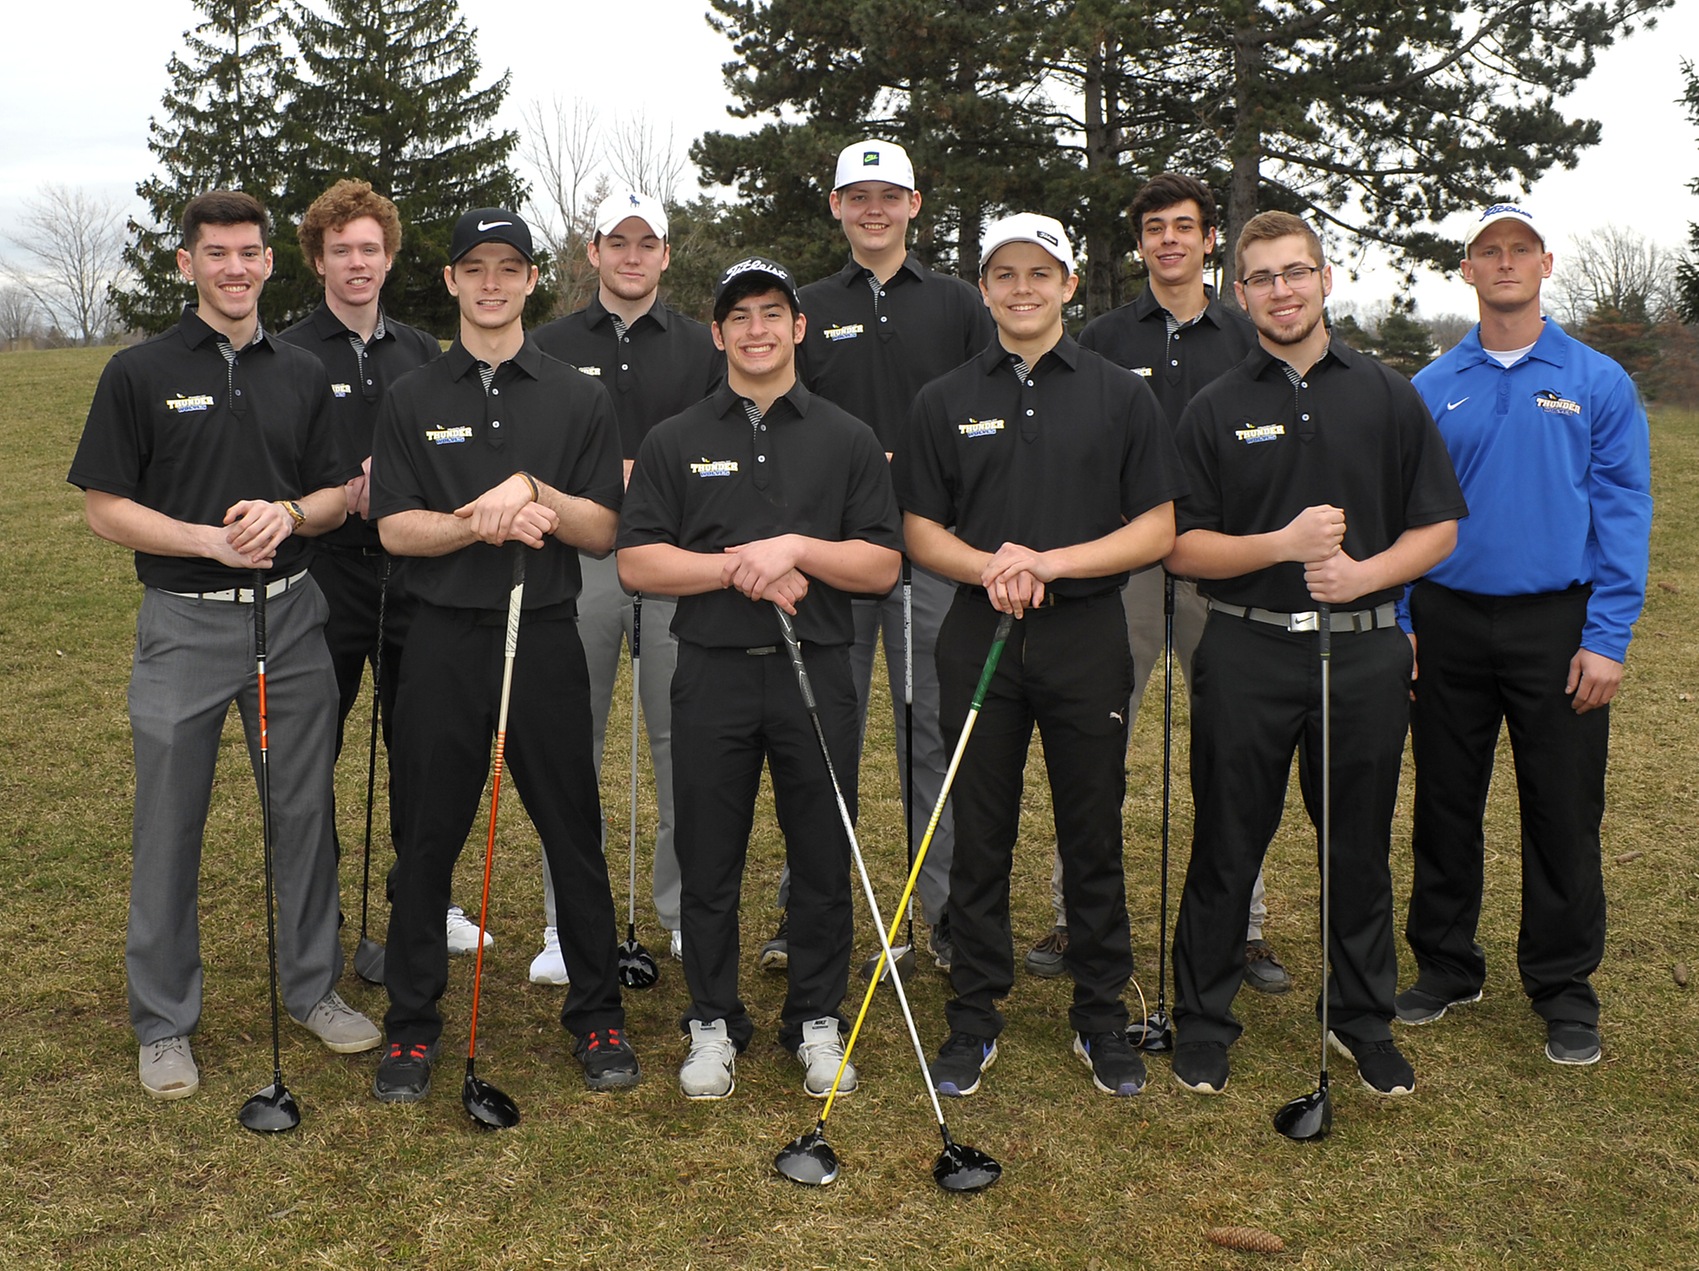 NCCC takes 2nd at Region III tourney; Oleski is COY